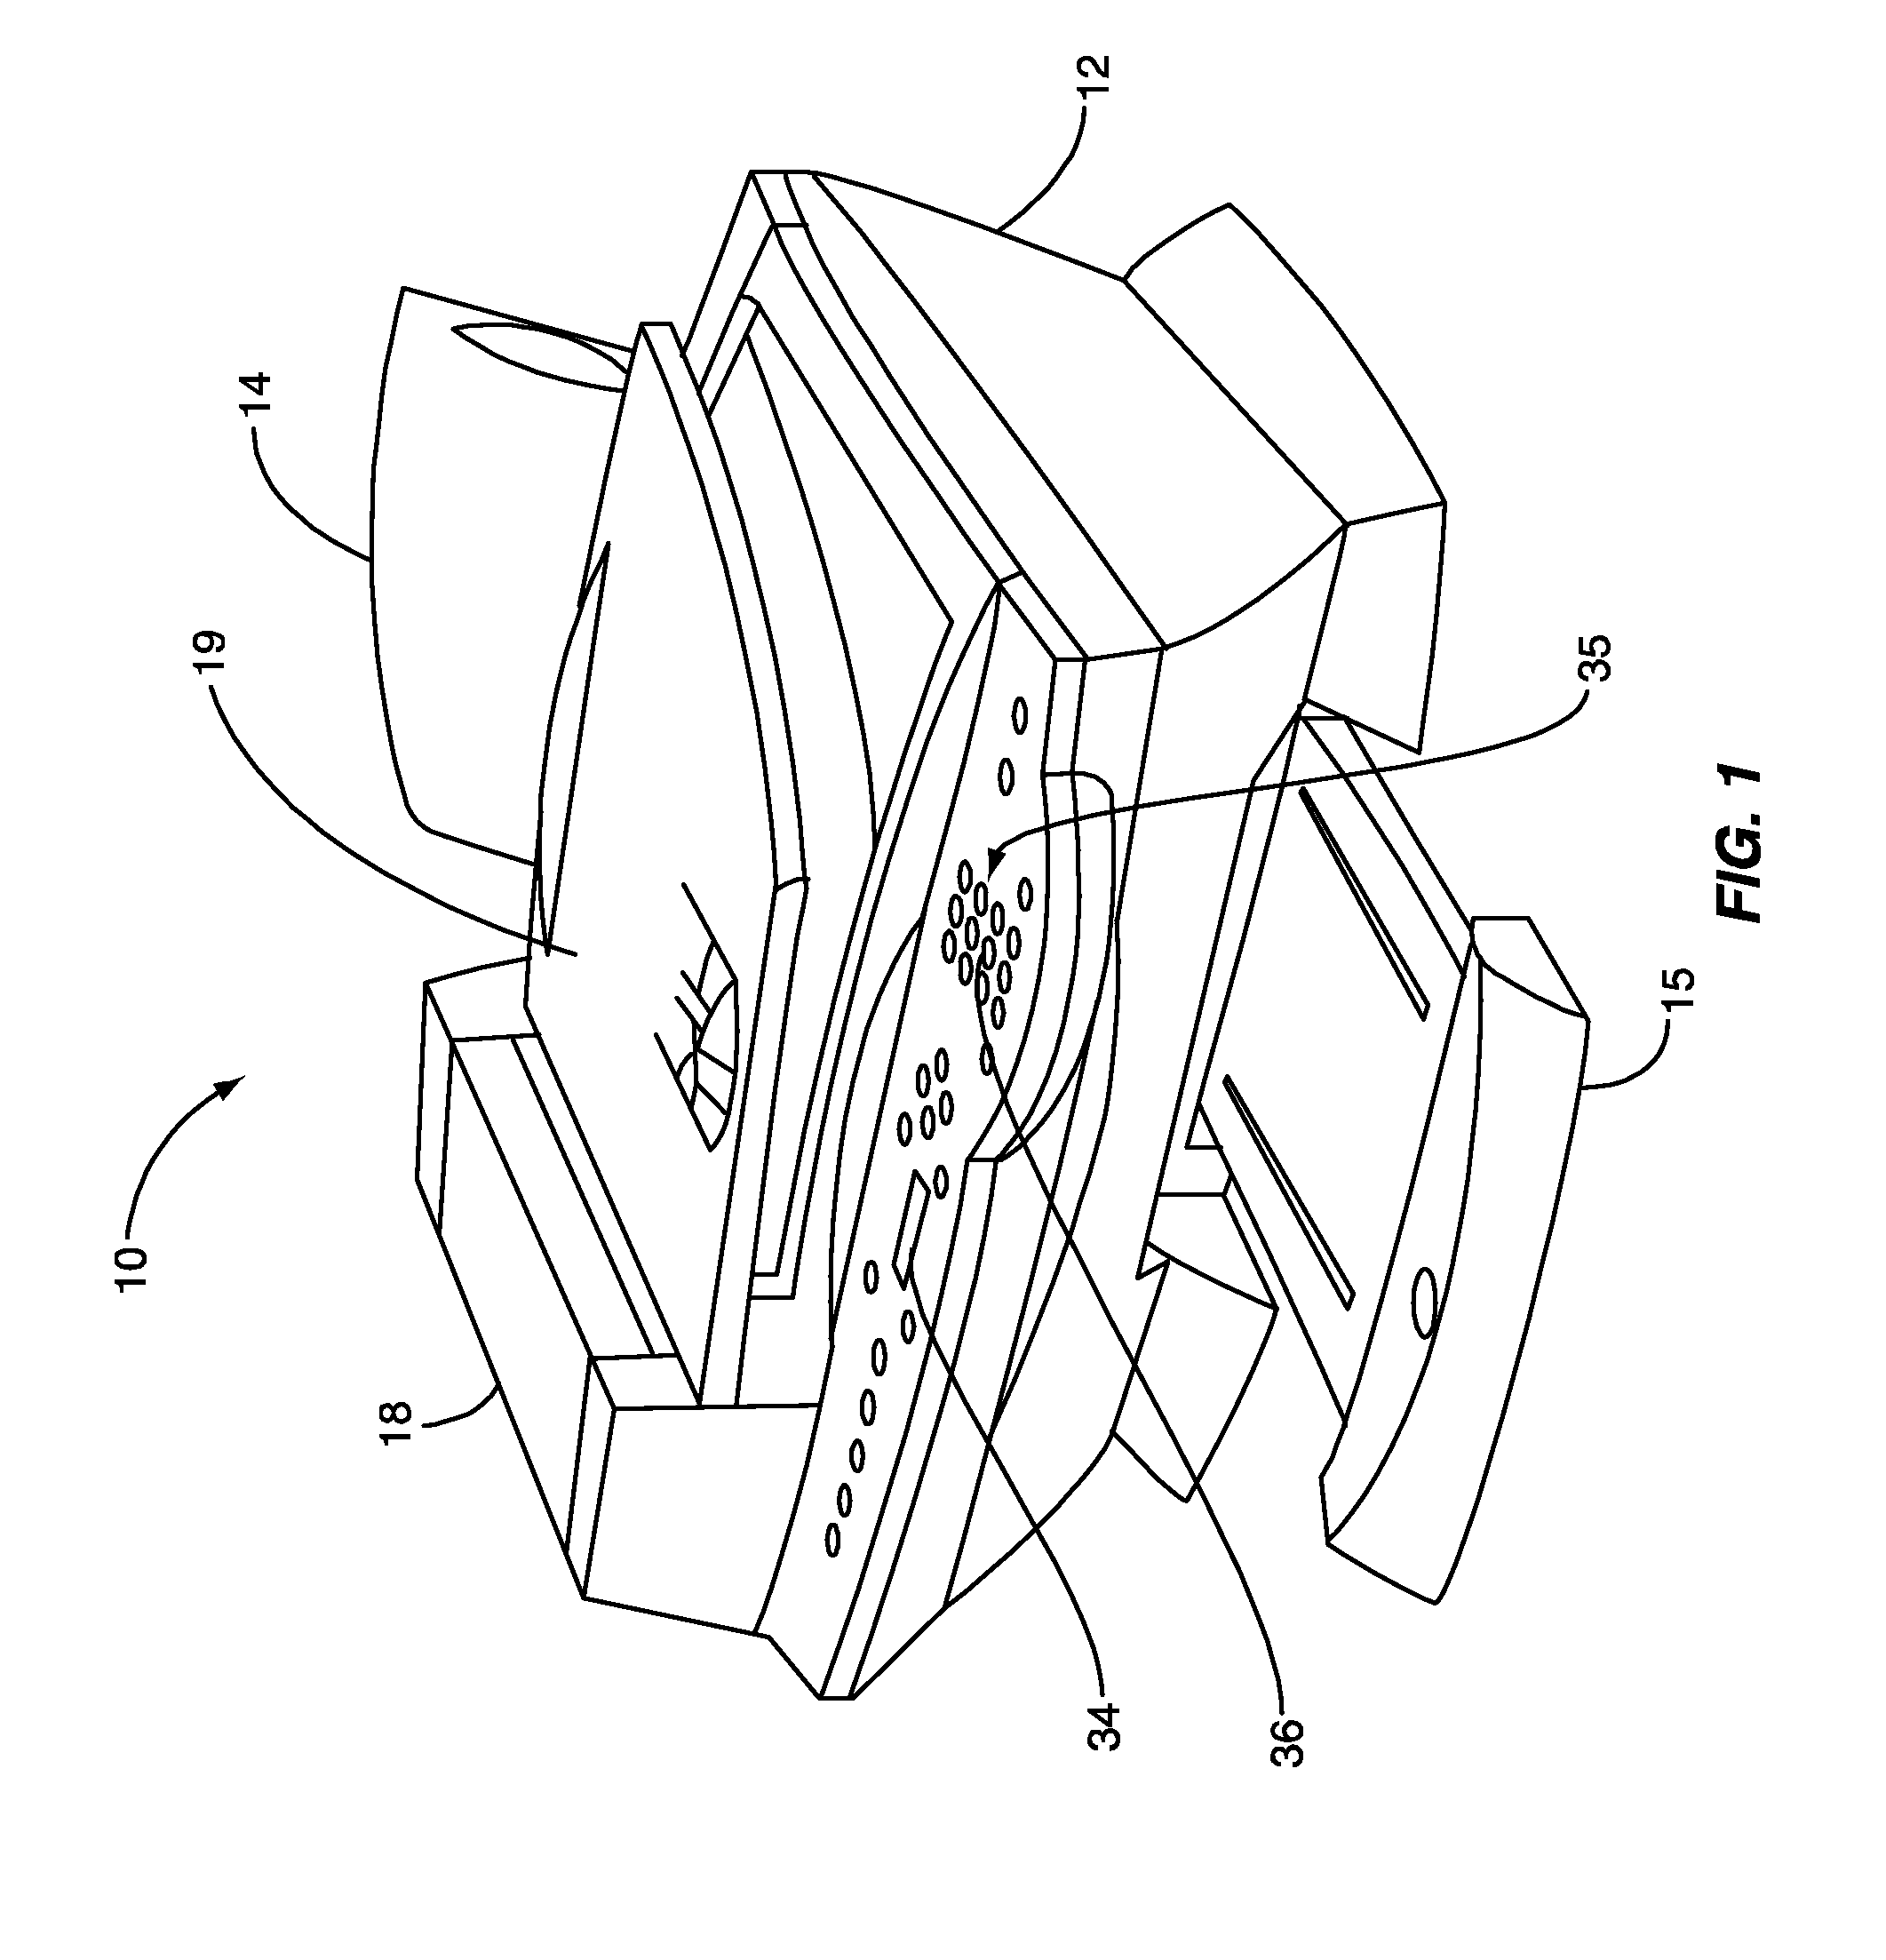 Image Illumination And Capture In A Scanning Device